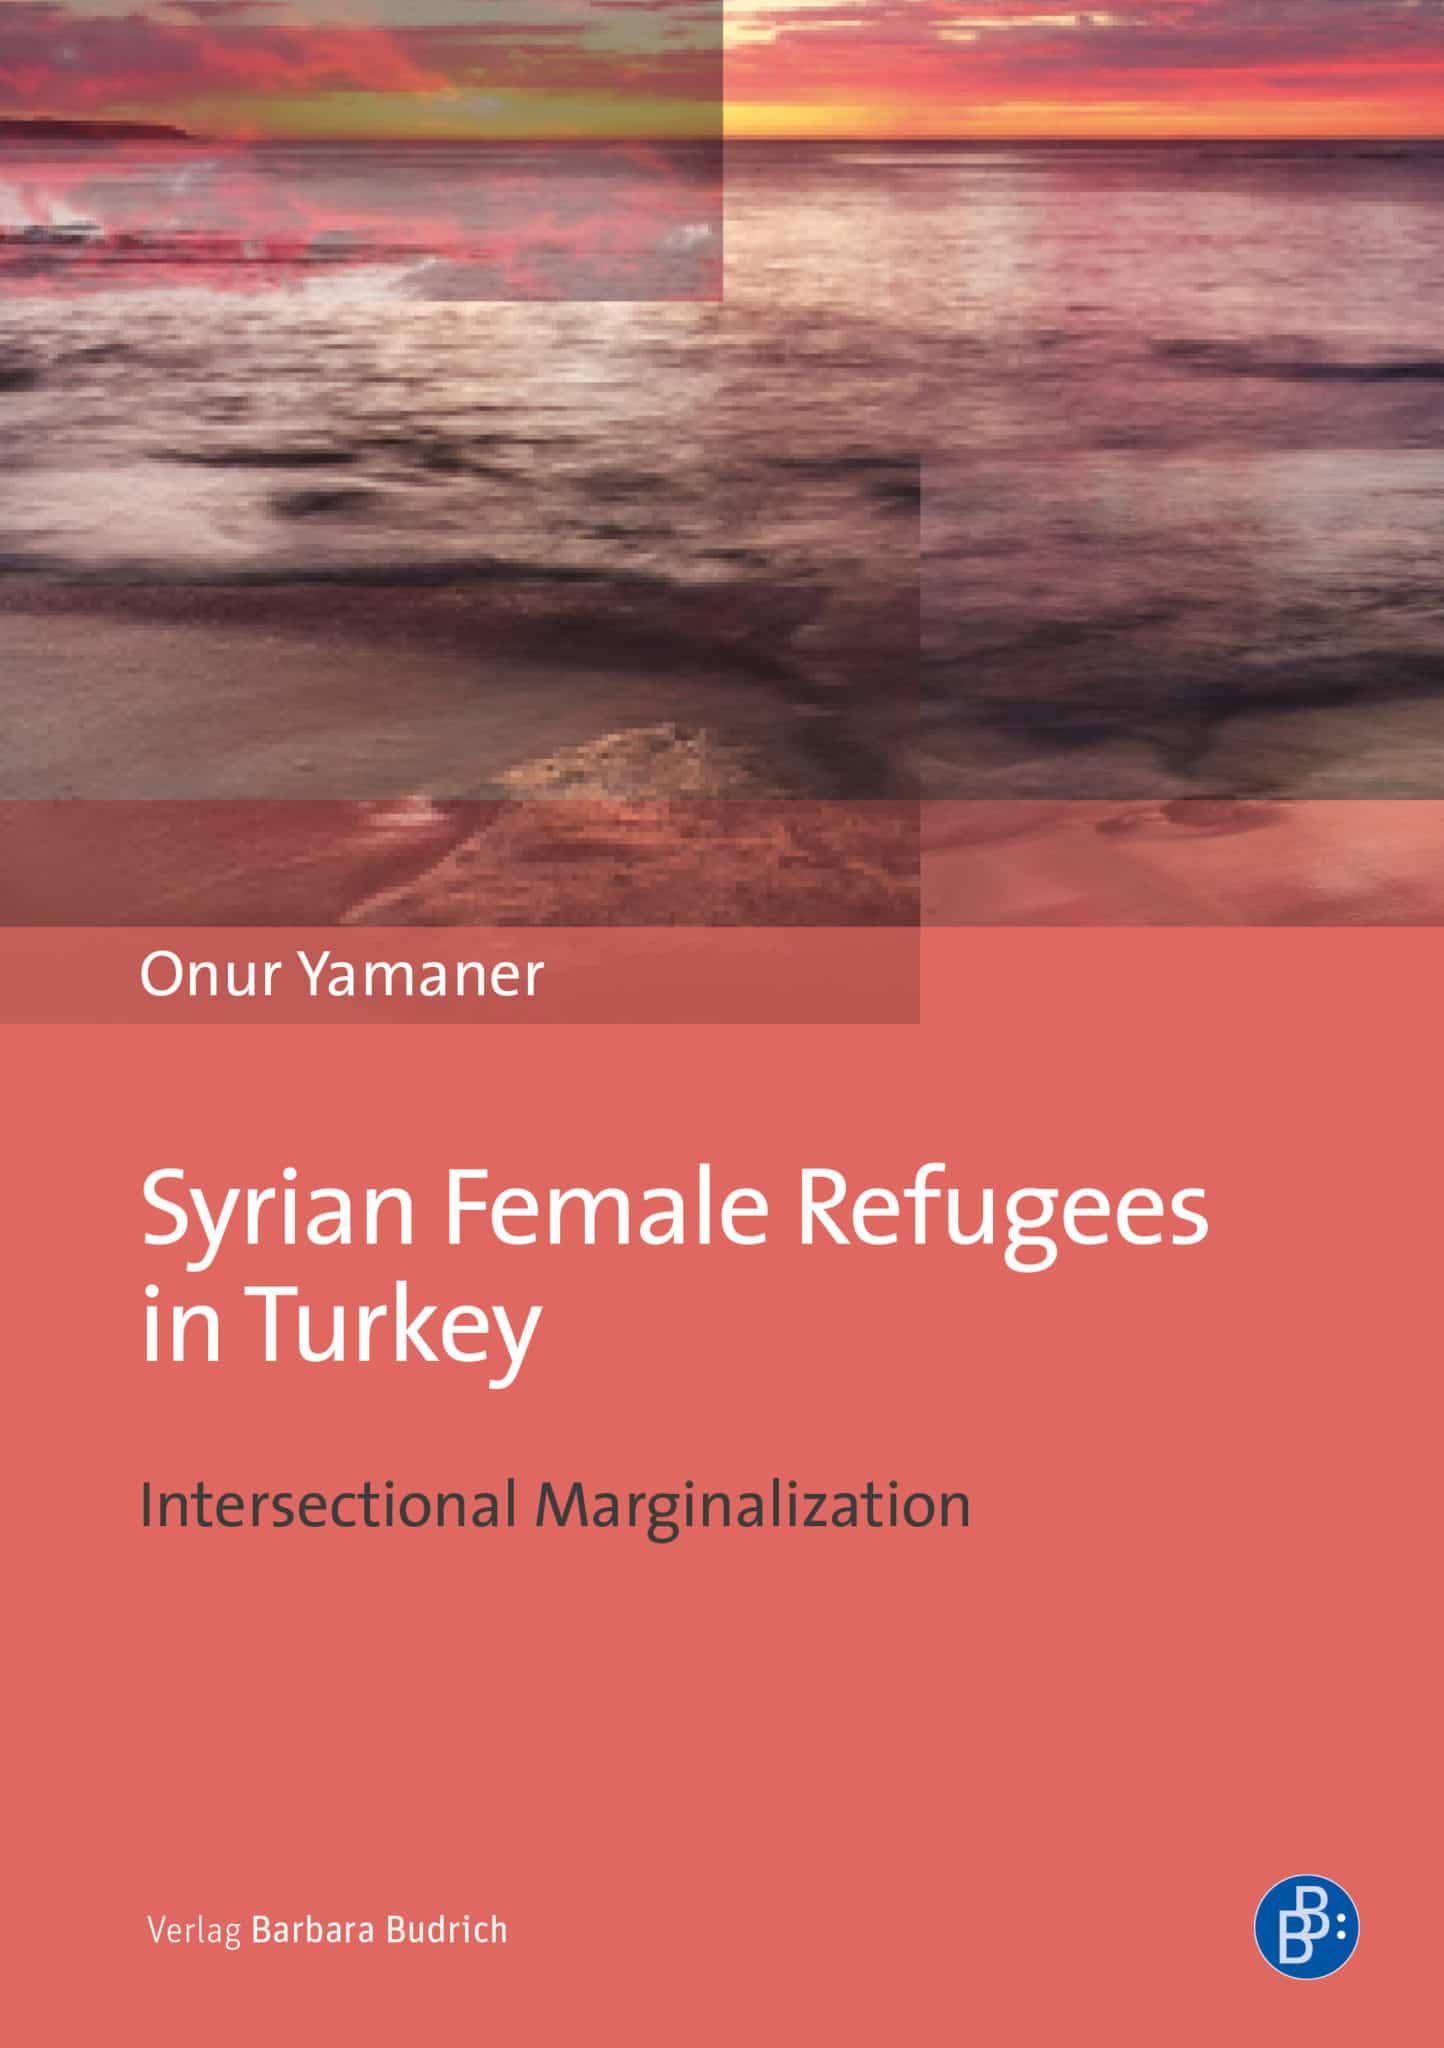 Book Cover Onur Yamaner Syrian Female Refugees in Turkey Intersectional Marginalization; orange tones with a picture of the sea